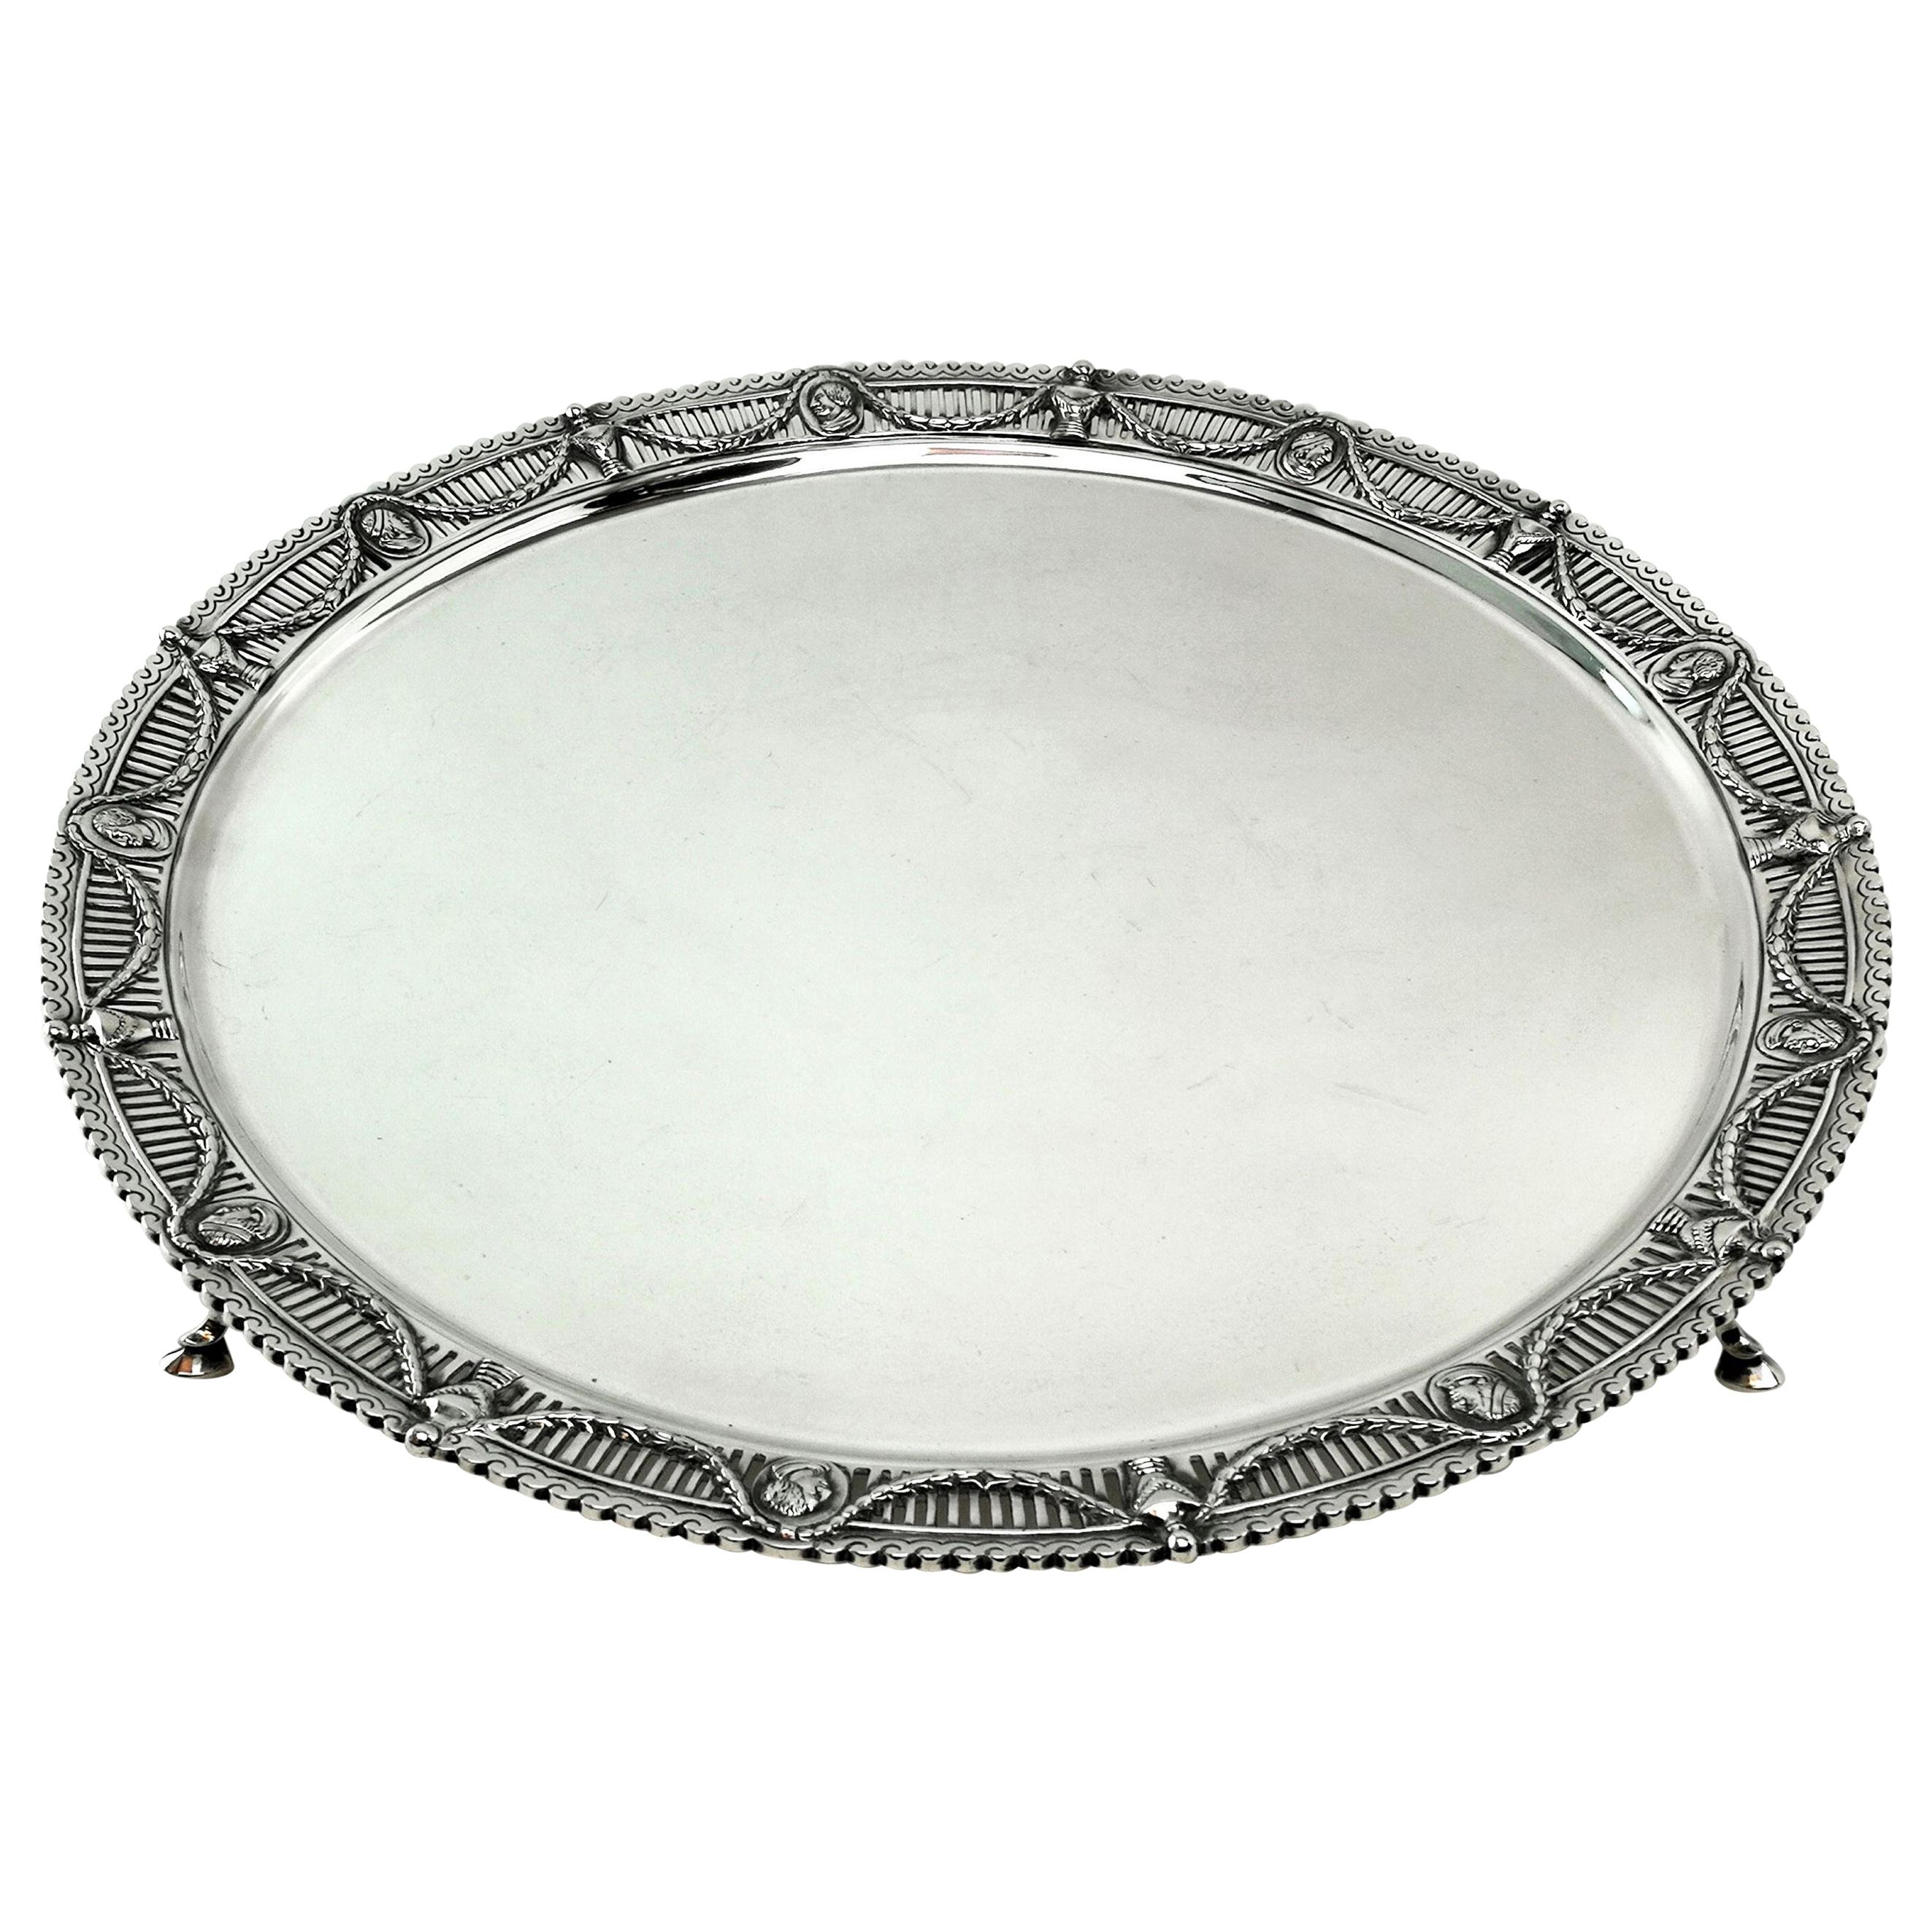 Victorian Antique Sterling Silver Salver / Tray / Platter 1897